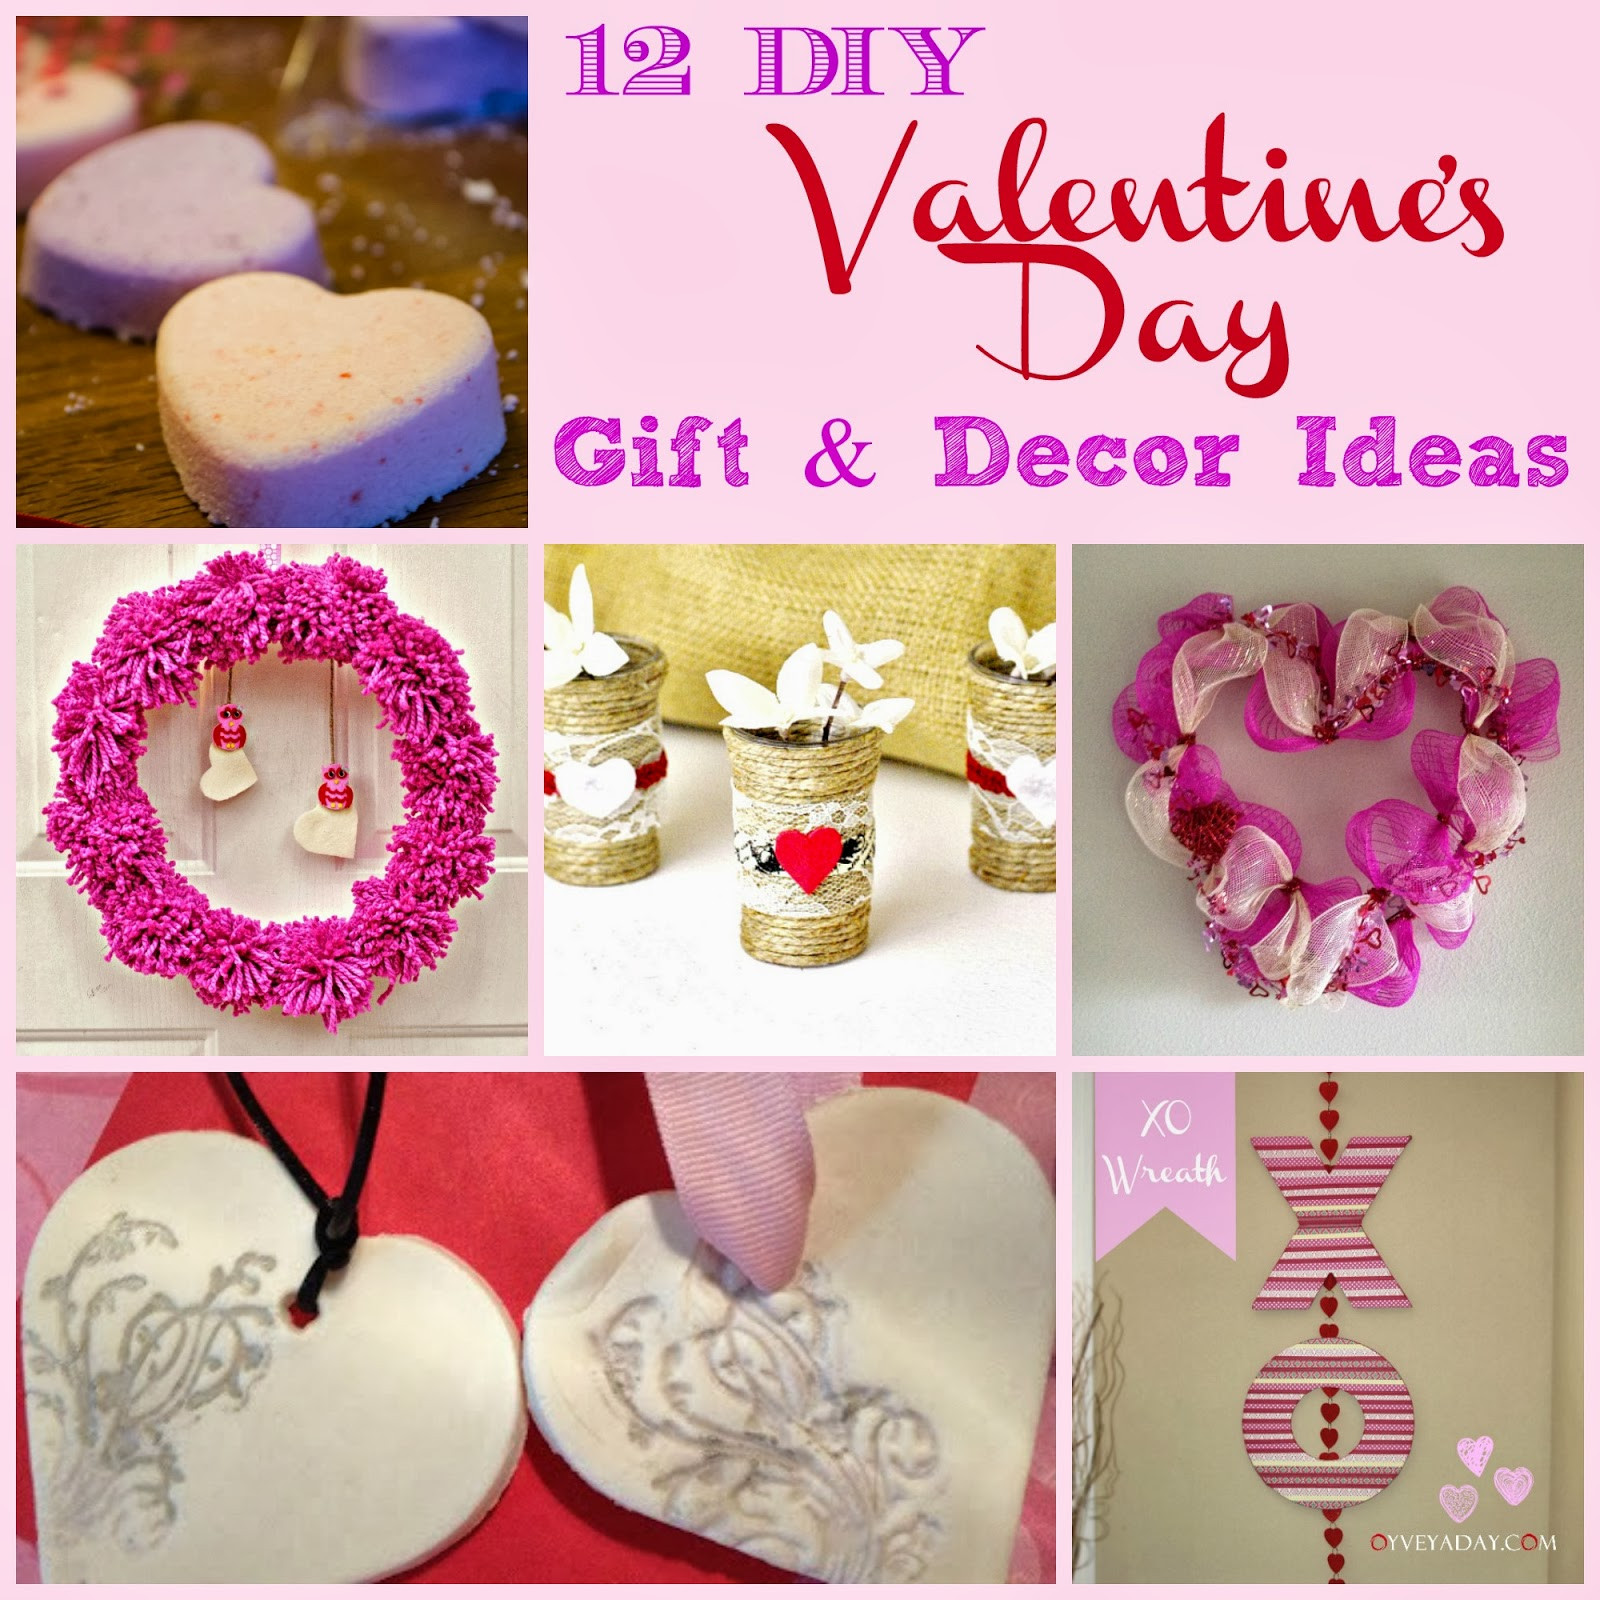 DIY Valentines Gift
 12 DIY Valentine s Day Gift & Decor Ideas Outnumbered 3 to 1